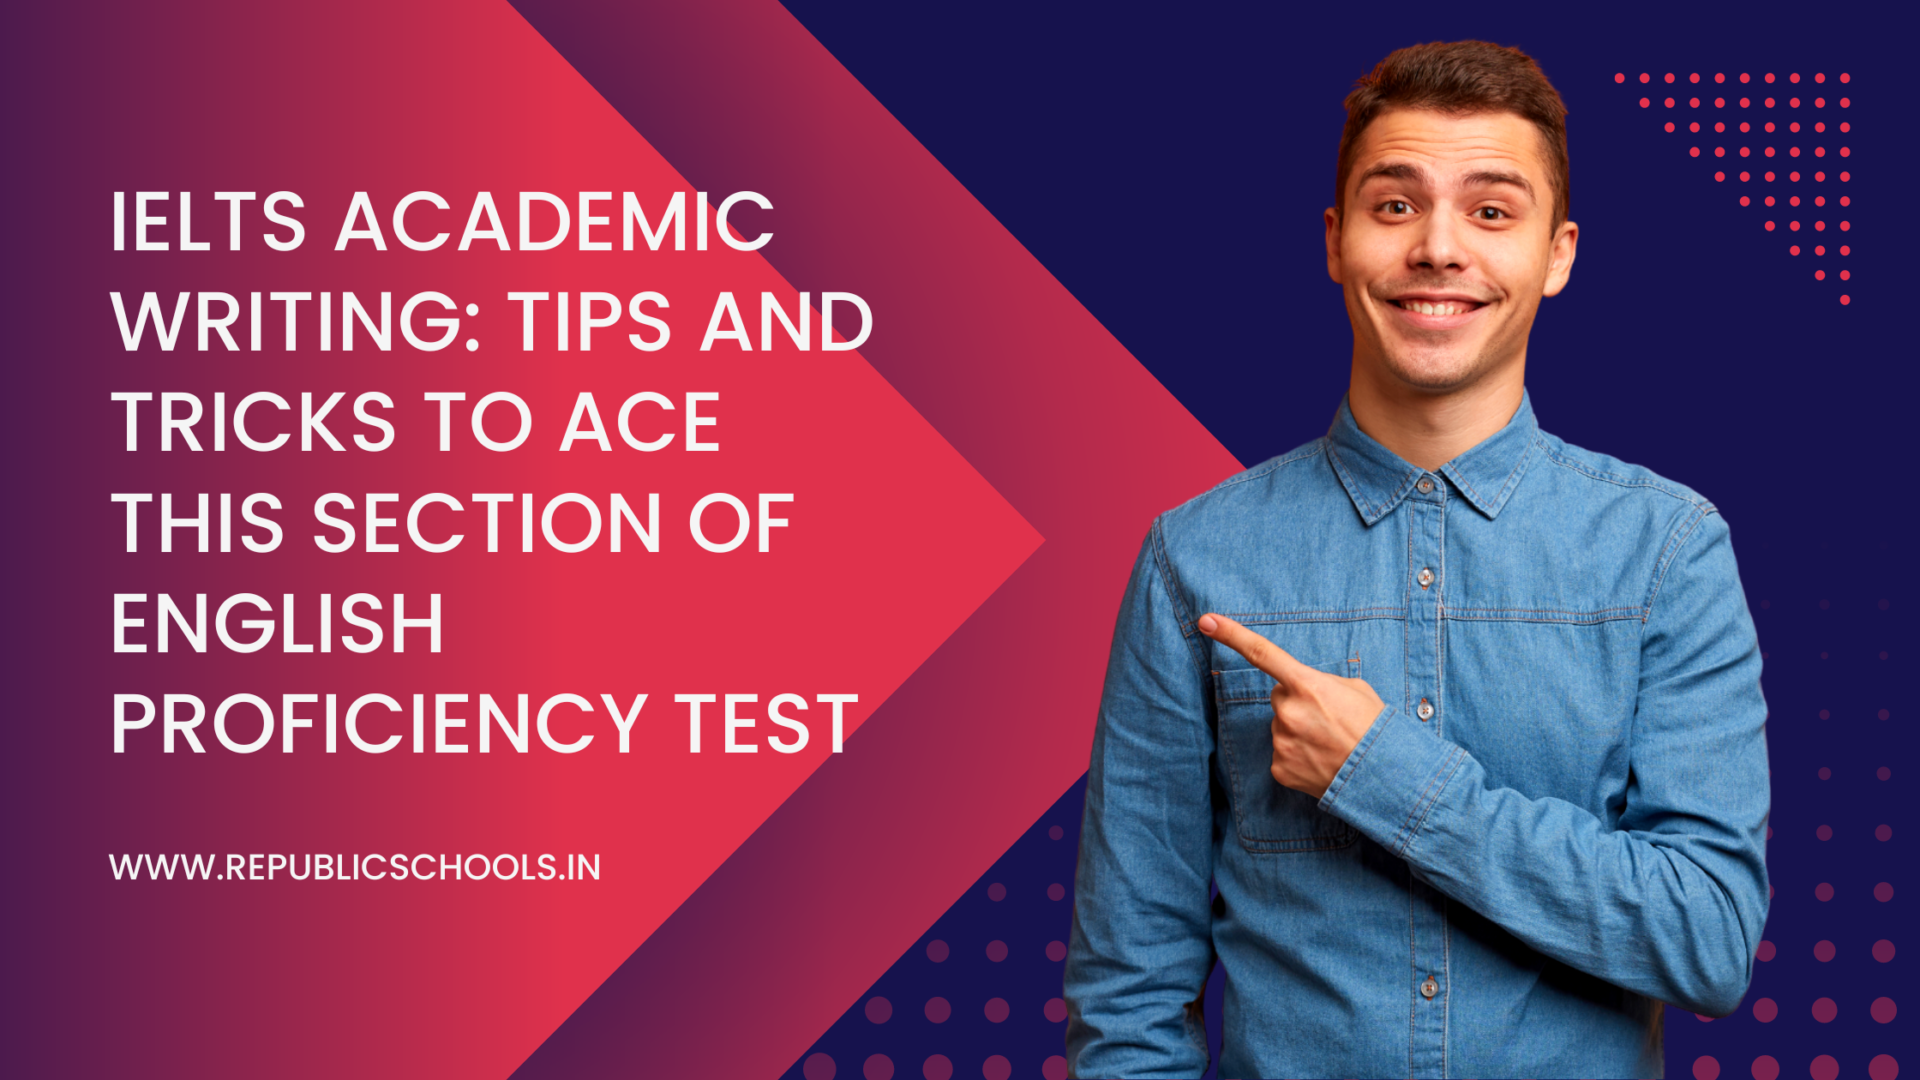 IELTS Academic Writing: Tips And Tricks To Ace This Section Of English Proficiency Test